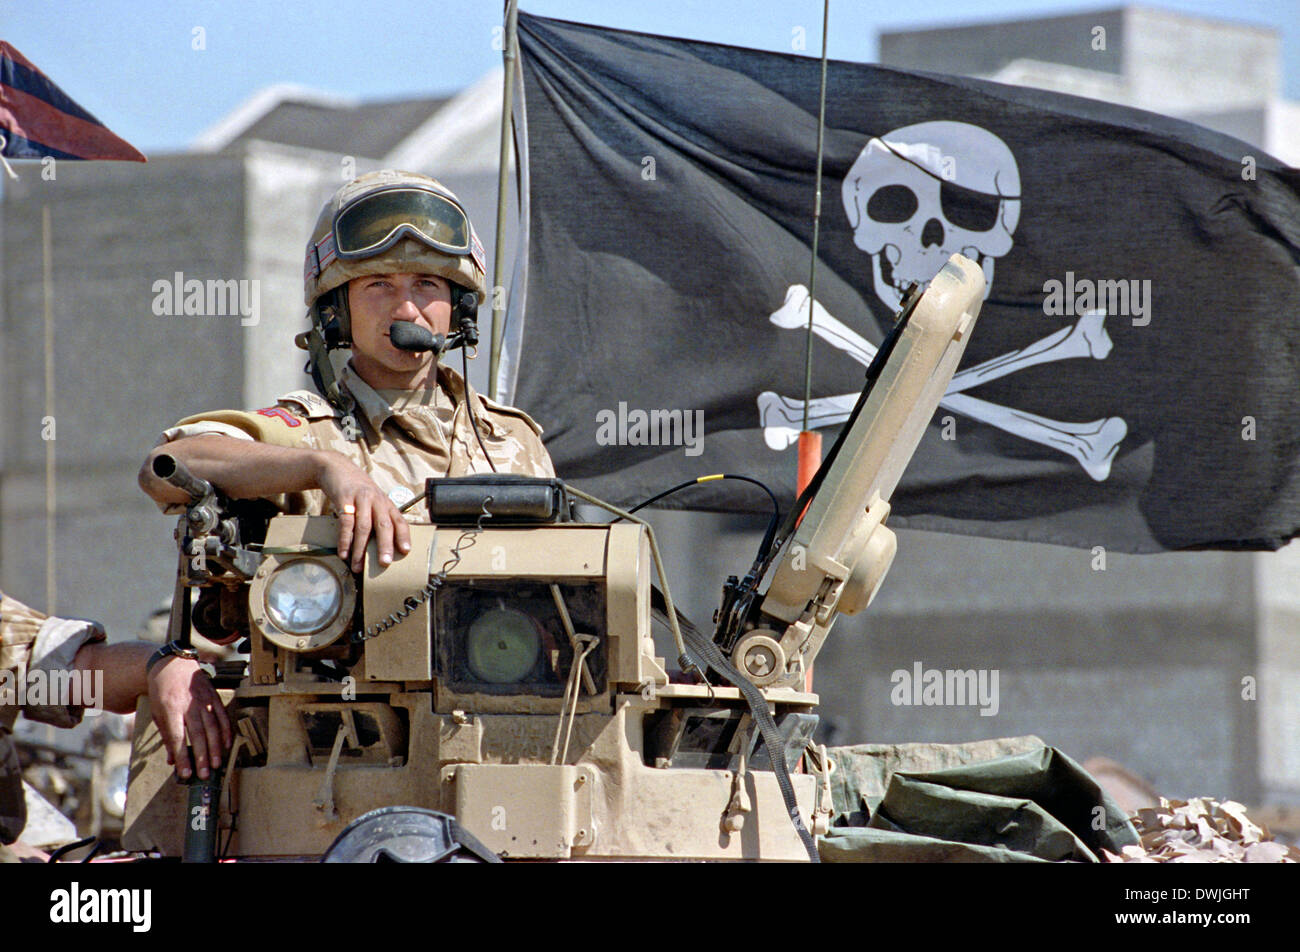 A British army soldier displays a Jolly Rogers pirate flag from his Ferret armoured scout car during the Persian Gulf War February 24, 1991 in Saudi Arabia. Stock Photo